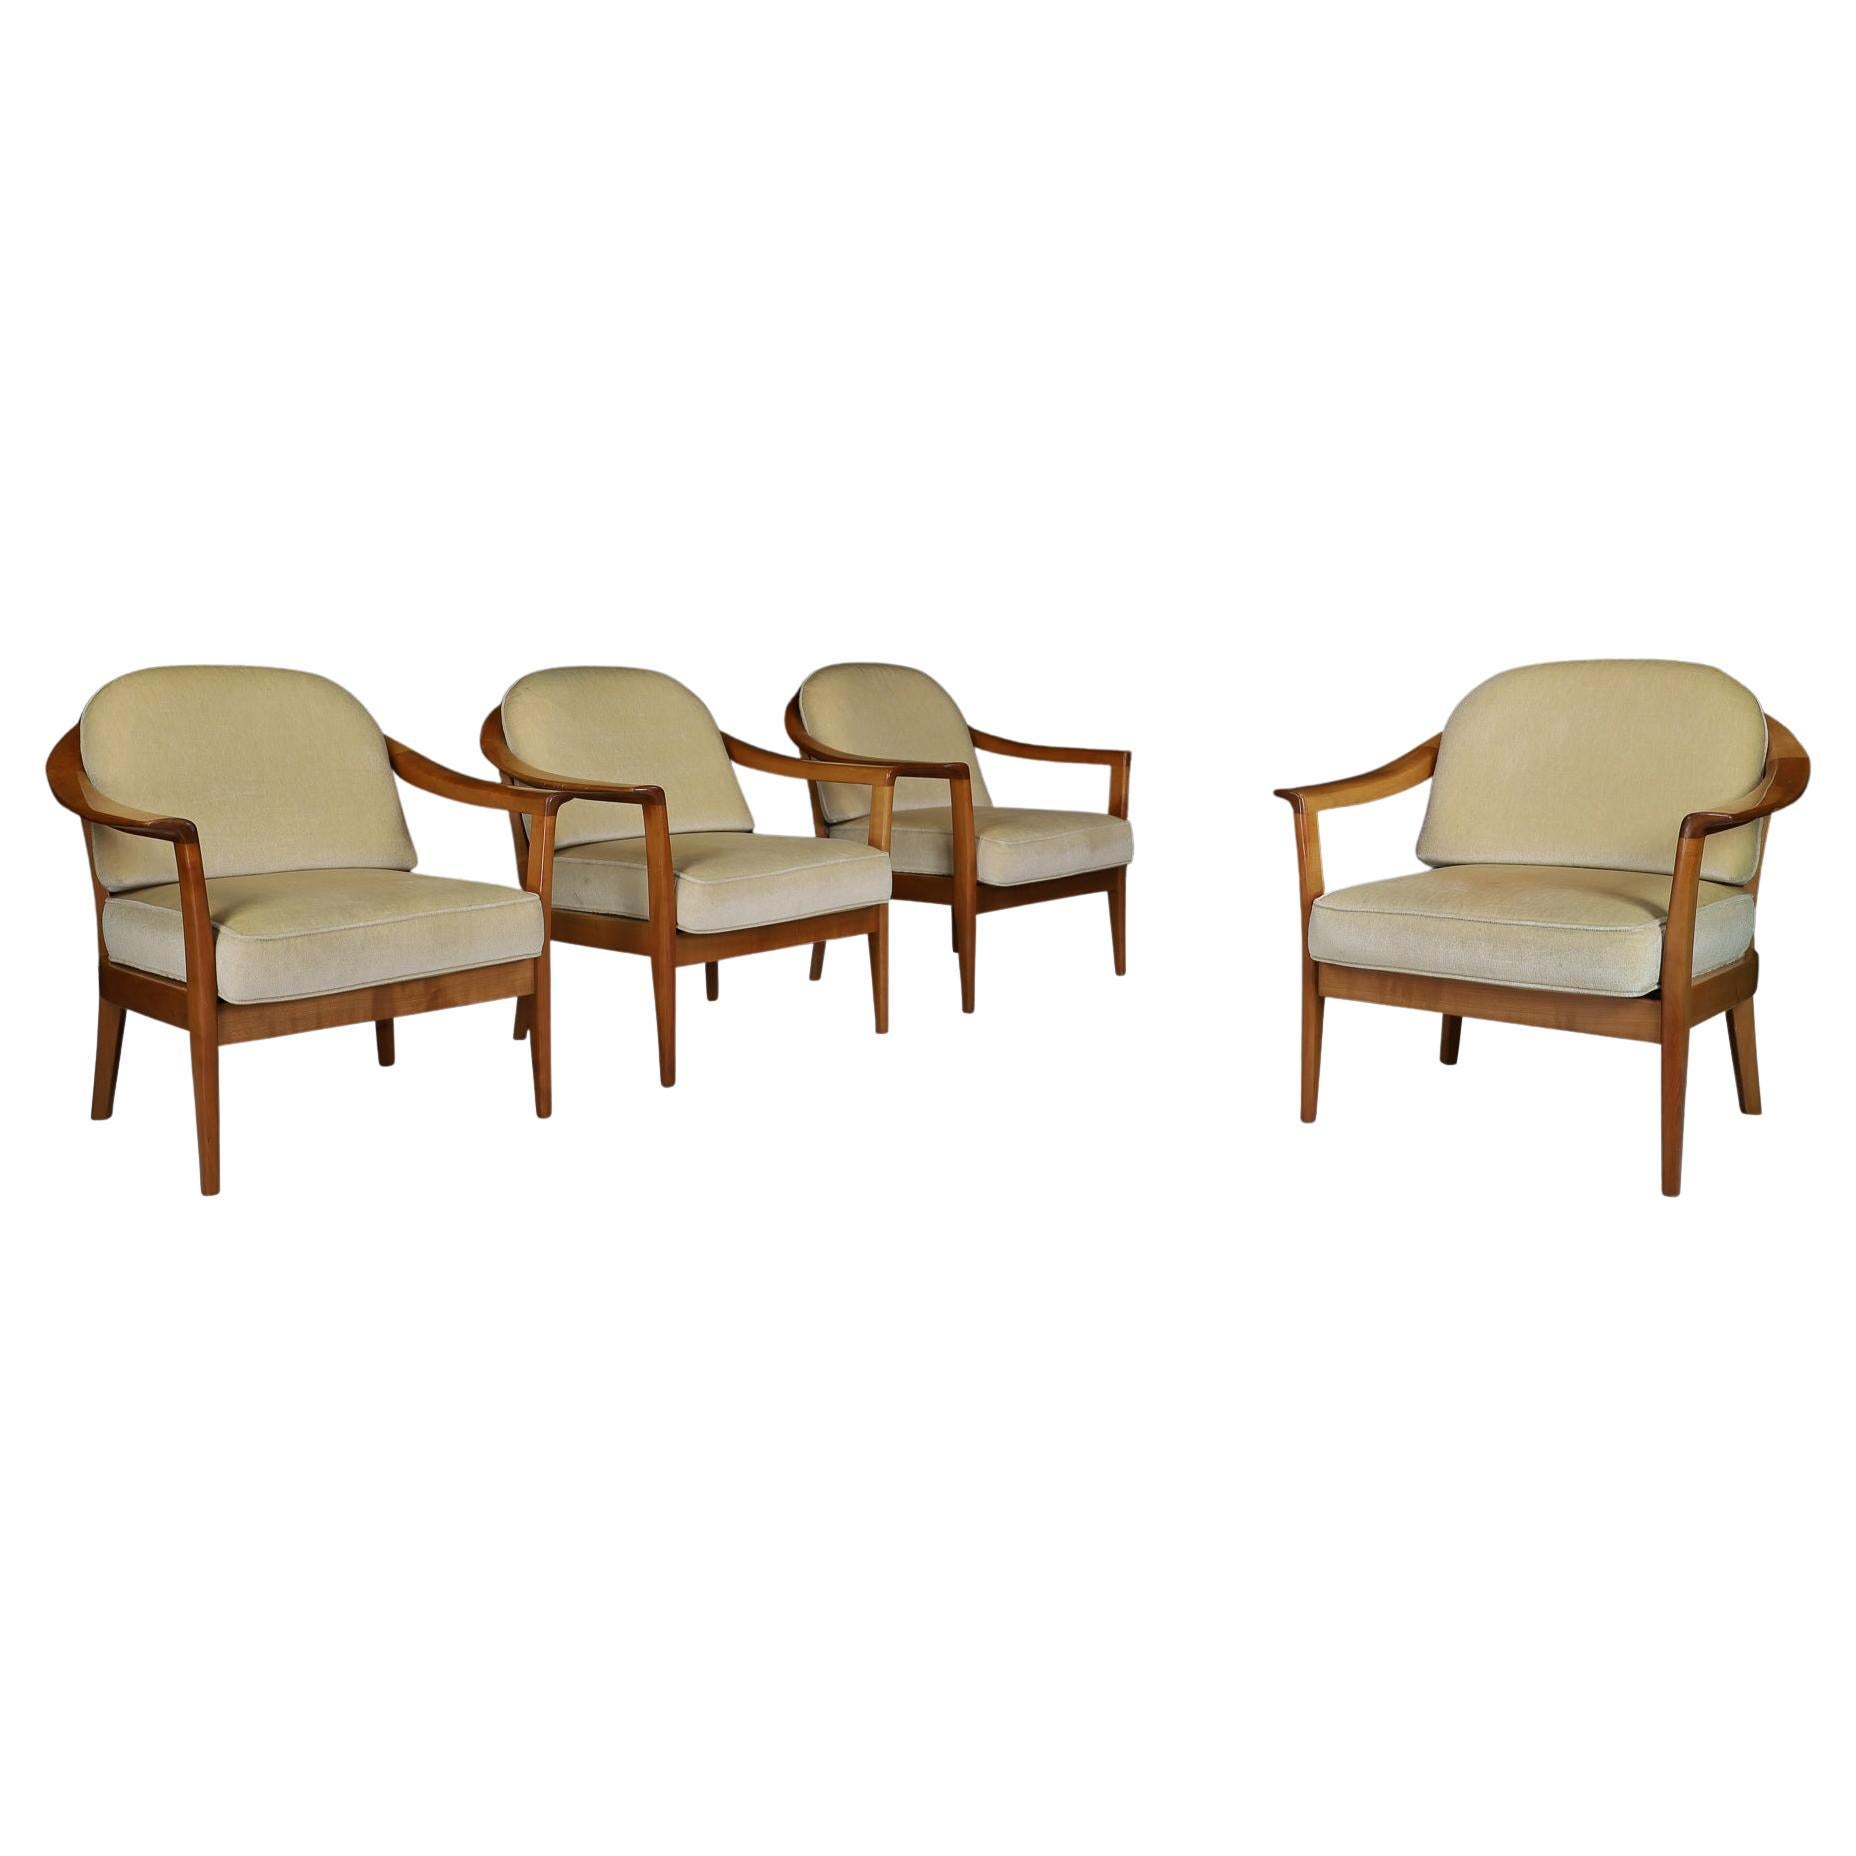 Wilhelm Knol Easy Chairs In Cherry and Original Upholstery, Germany 1960s